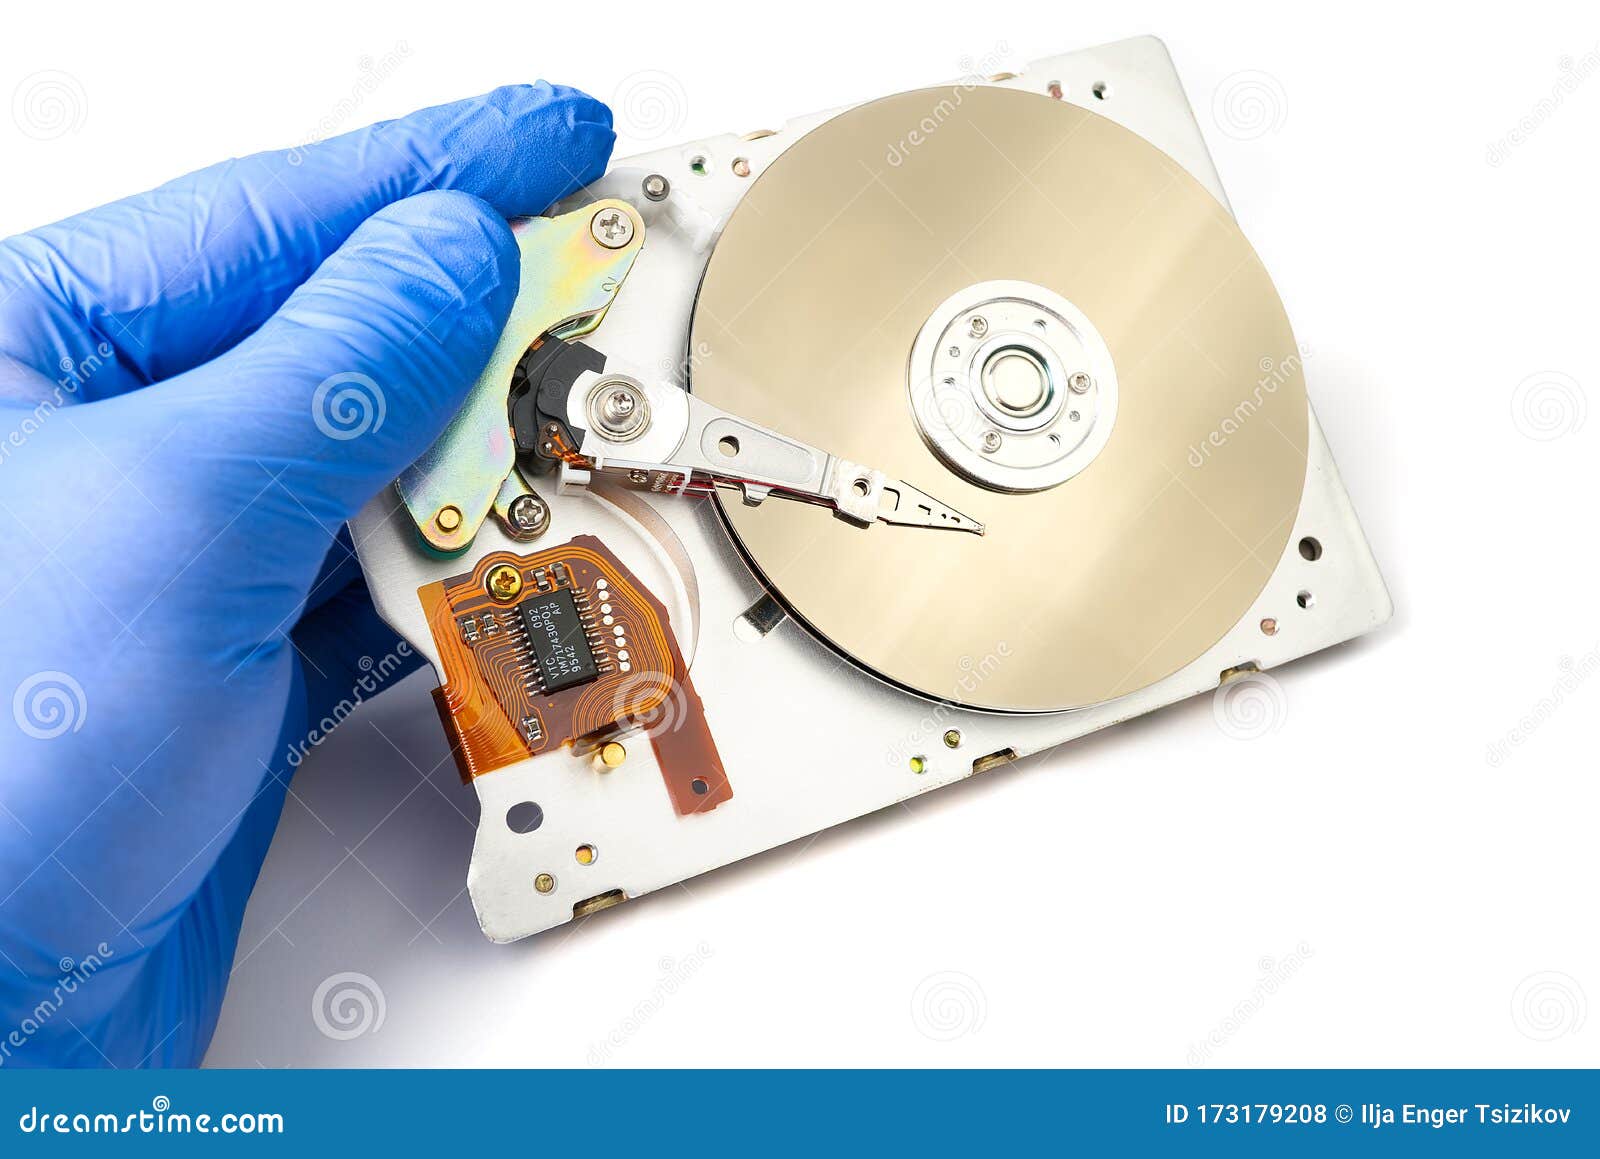 smøre Forkæl dig snyde A Hard Disk Drive HDD, Hard Disk, Hard Drive, or Fixed Disk is an  Electro-mechanical Data Storage Device that Uses Stock Photo - Image of  memory, computing: 173179208